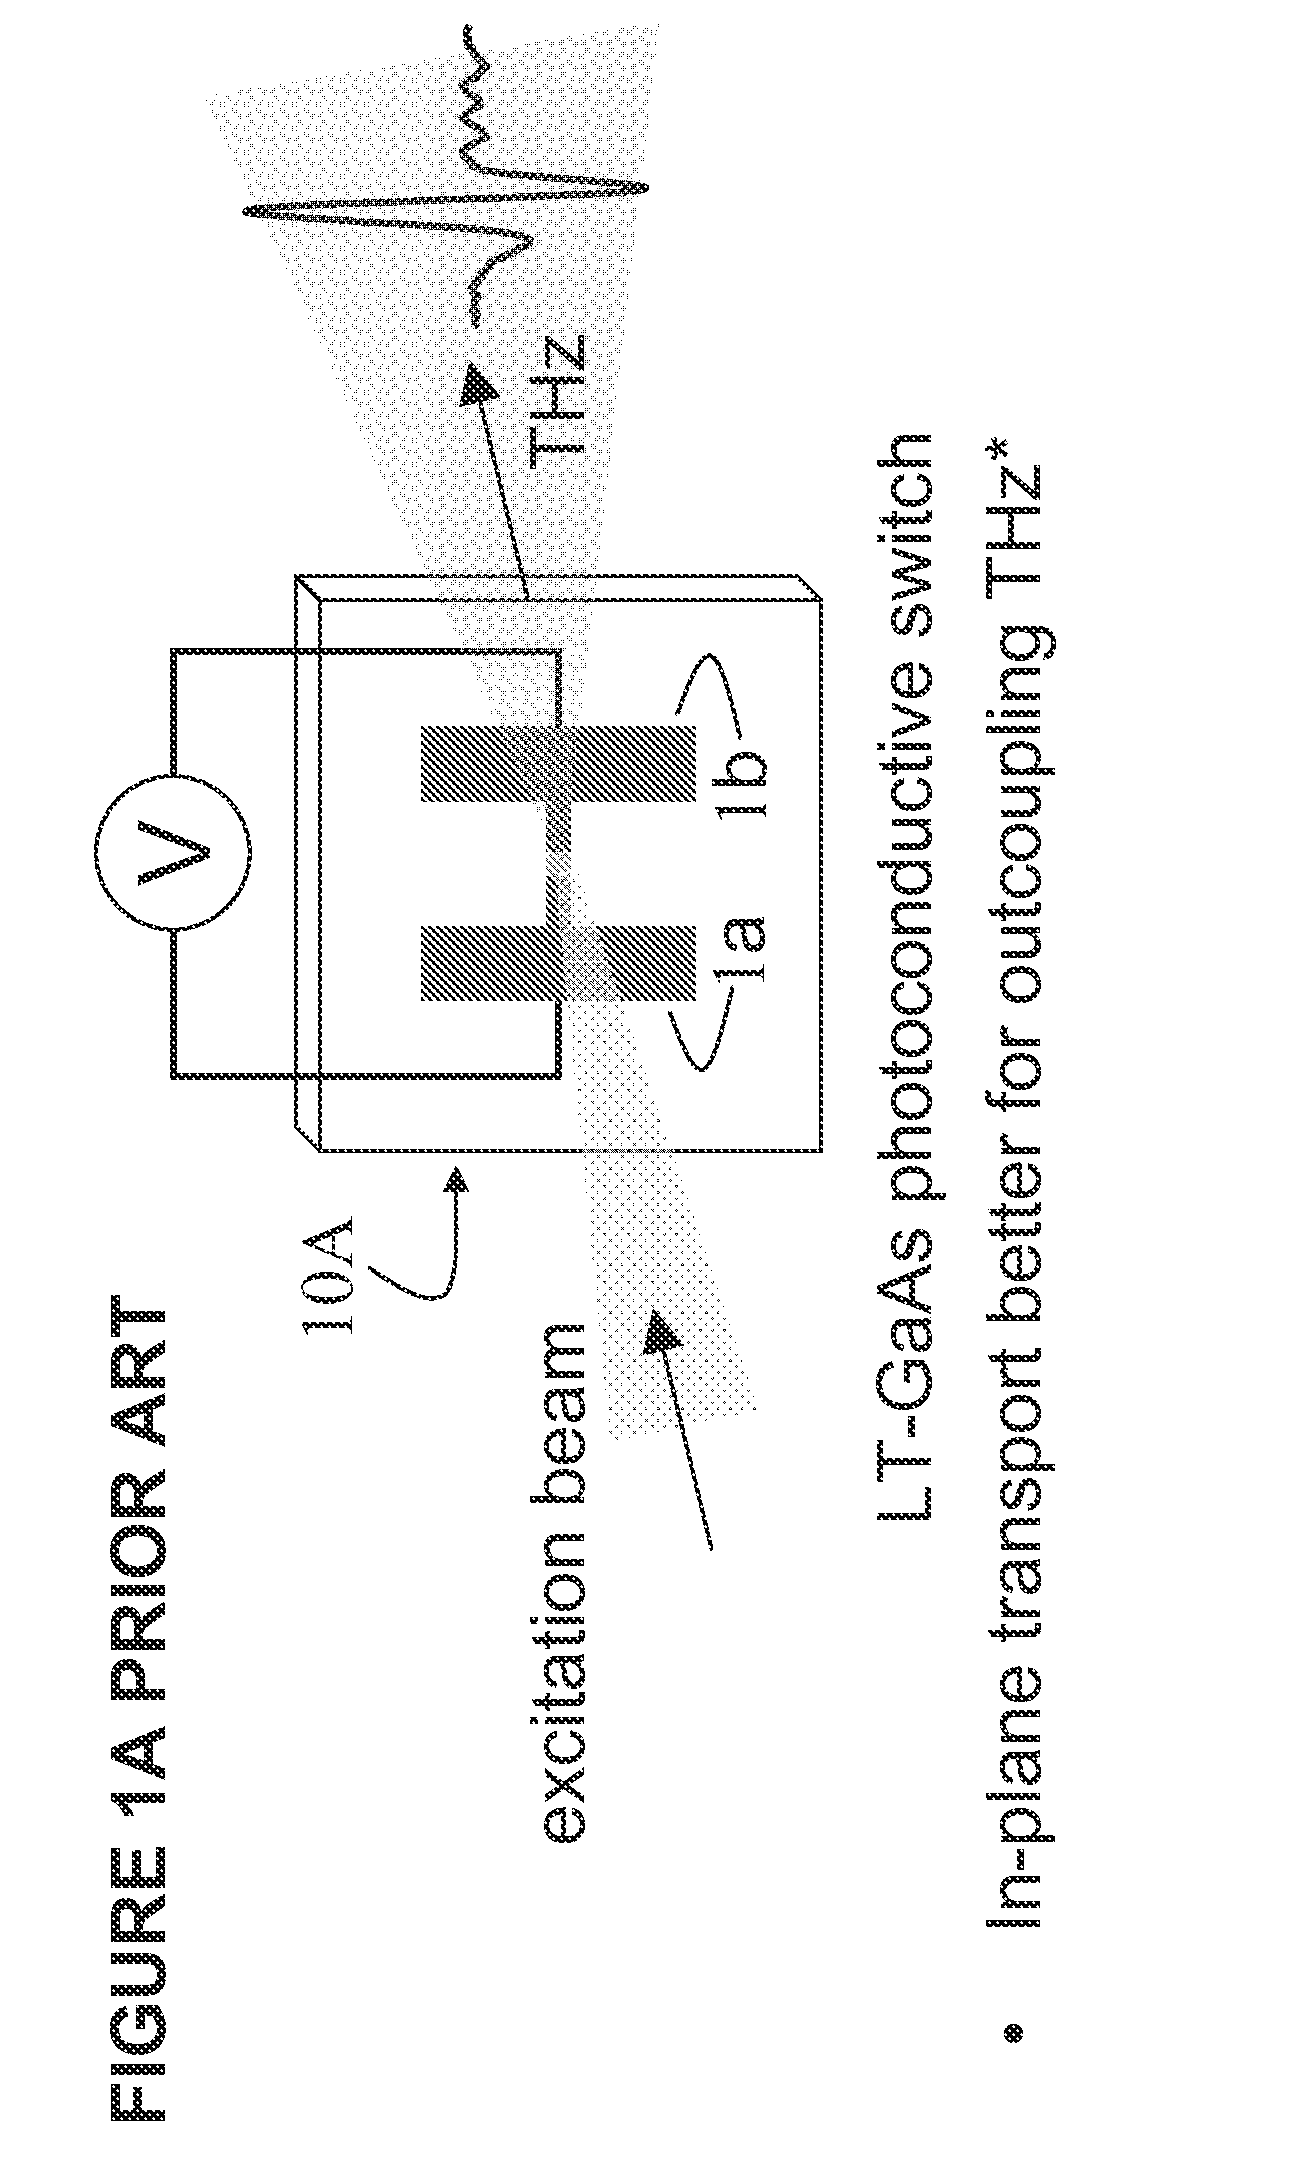 Method and apparatus for enhanced terahertz radiation from high stacking fault density